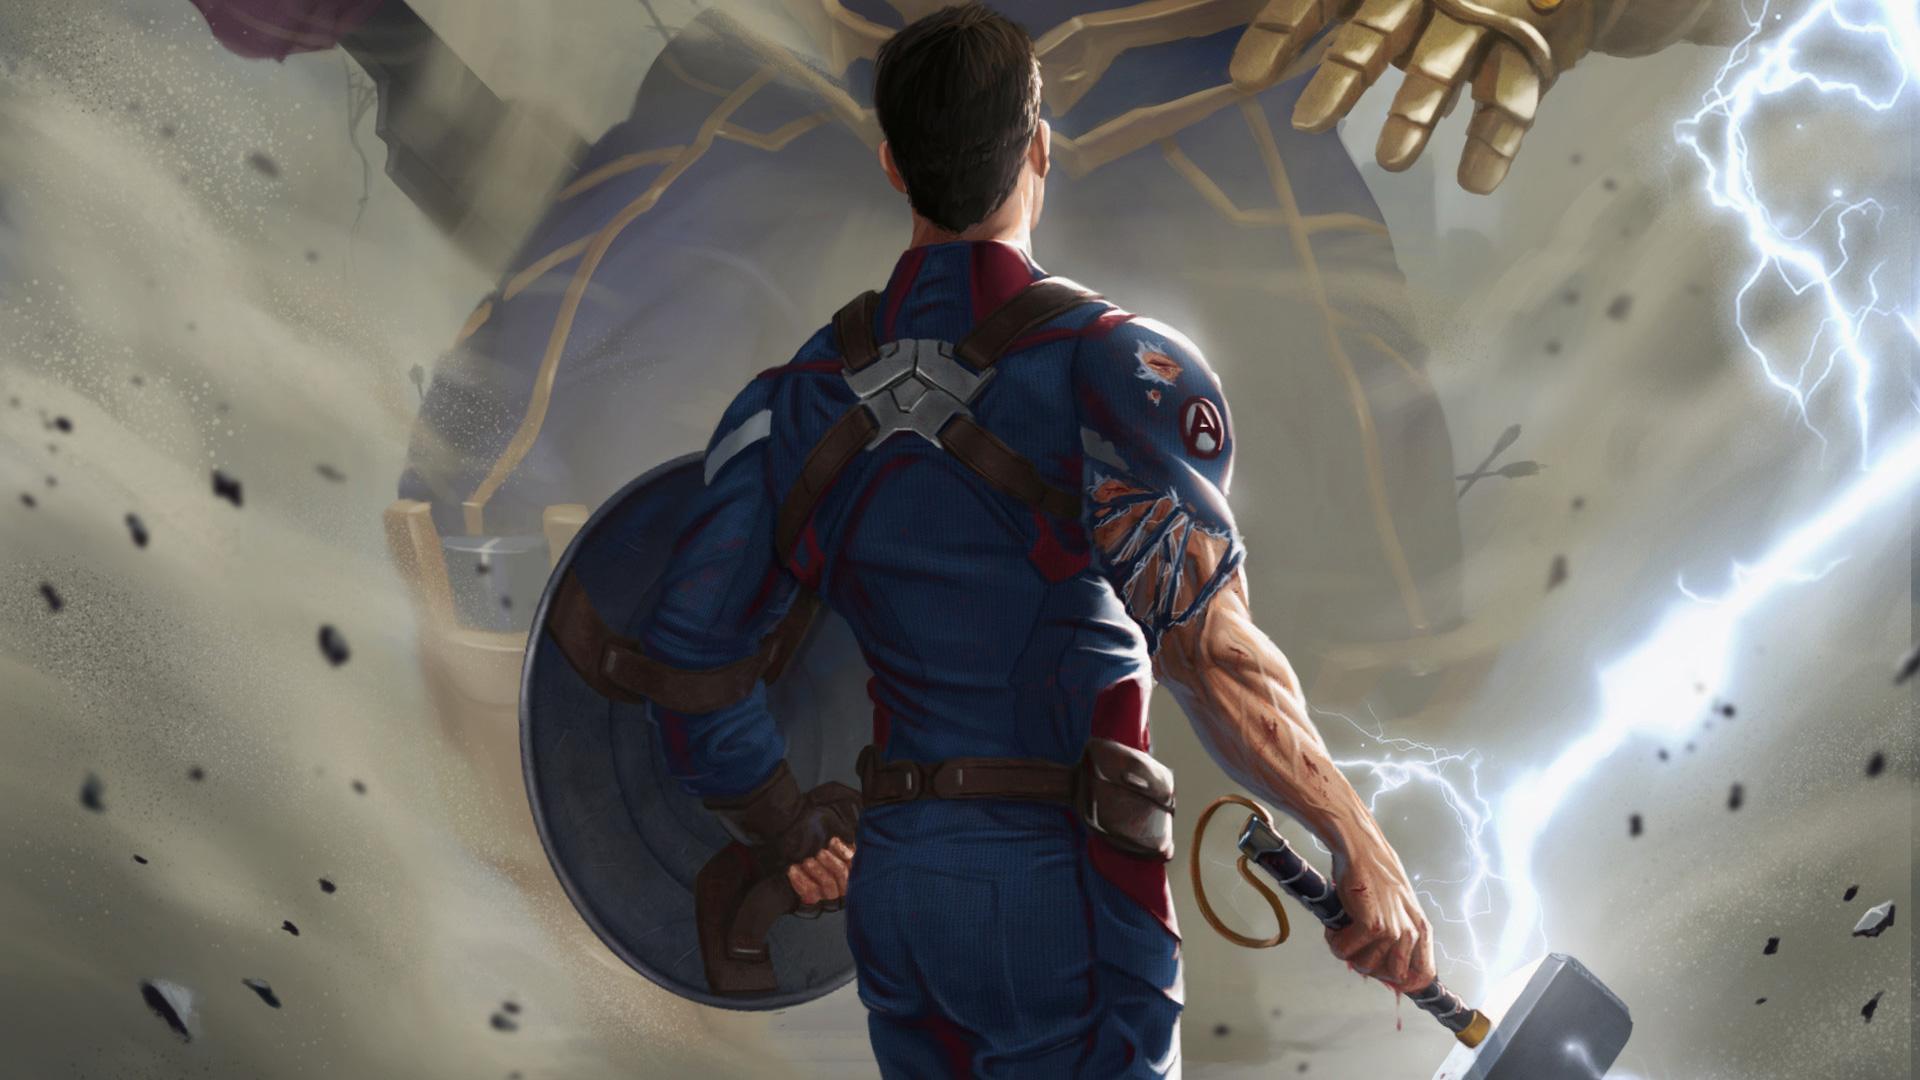 Captain America With Thor Hammer, HD Superheroes, 4k Wallpaper